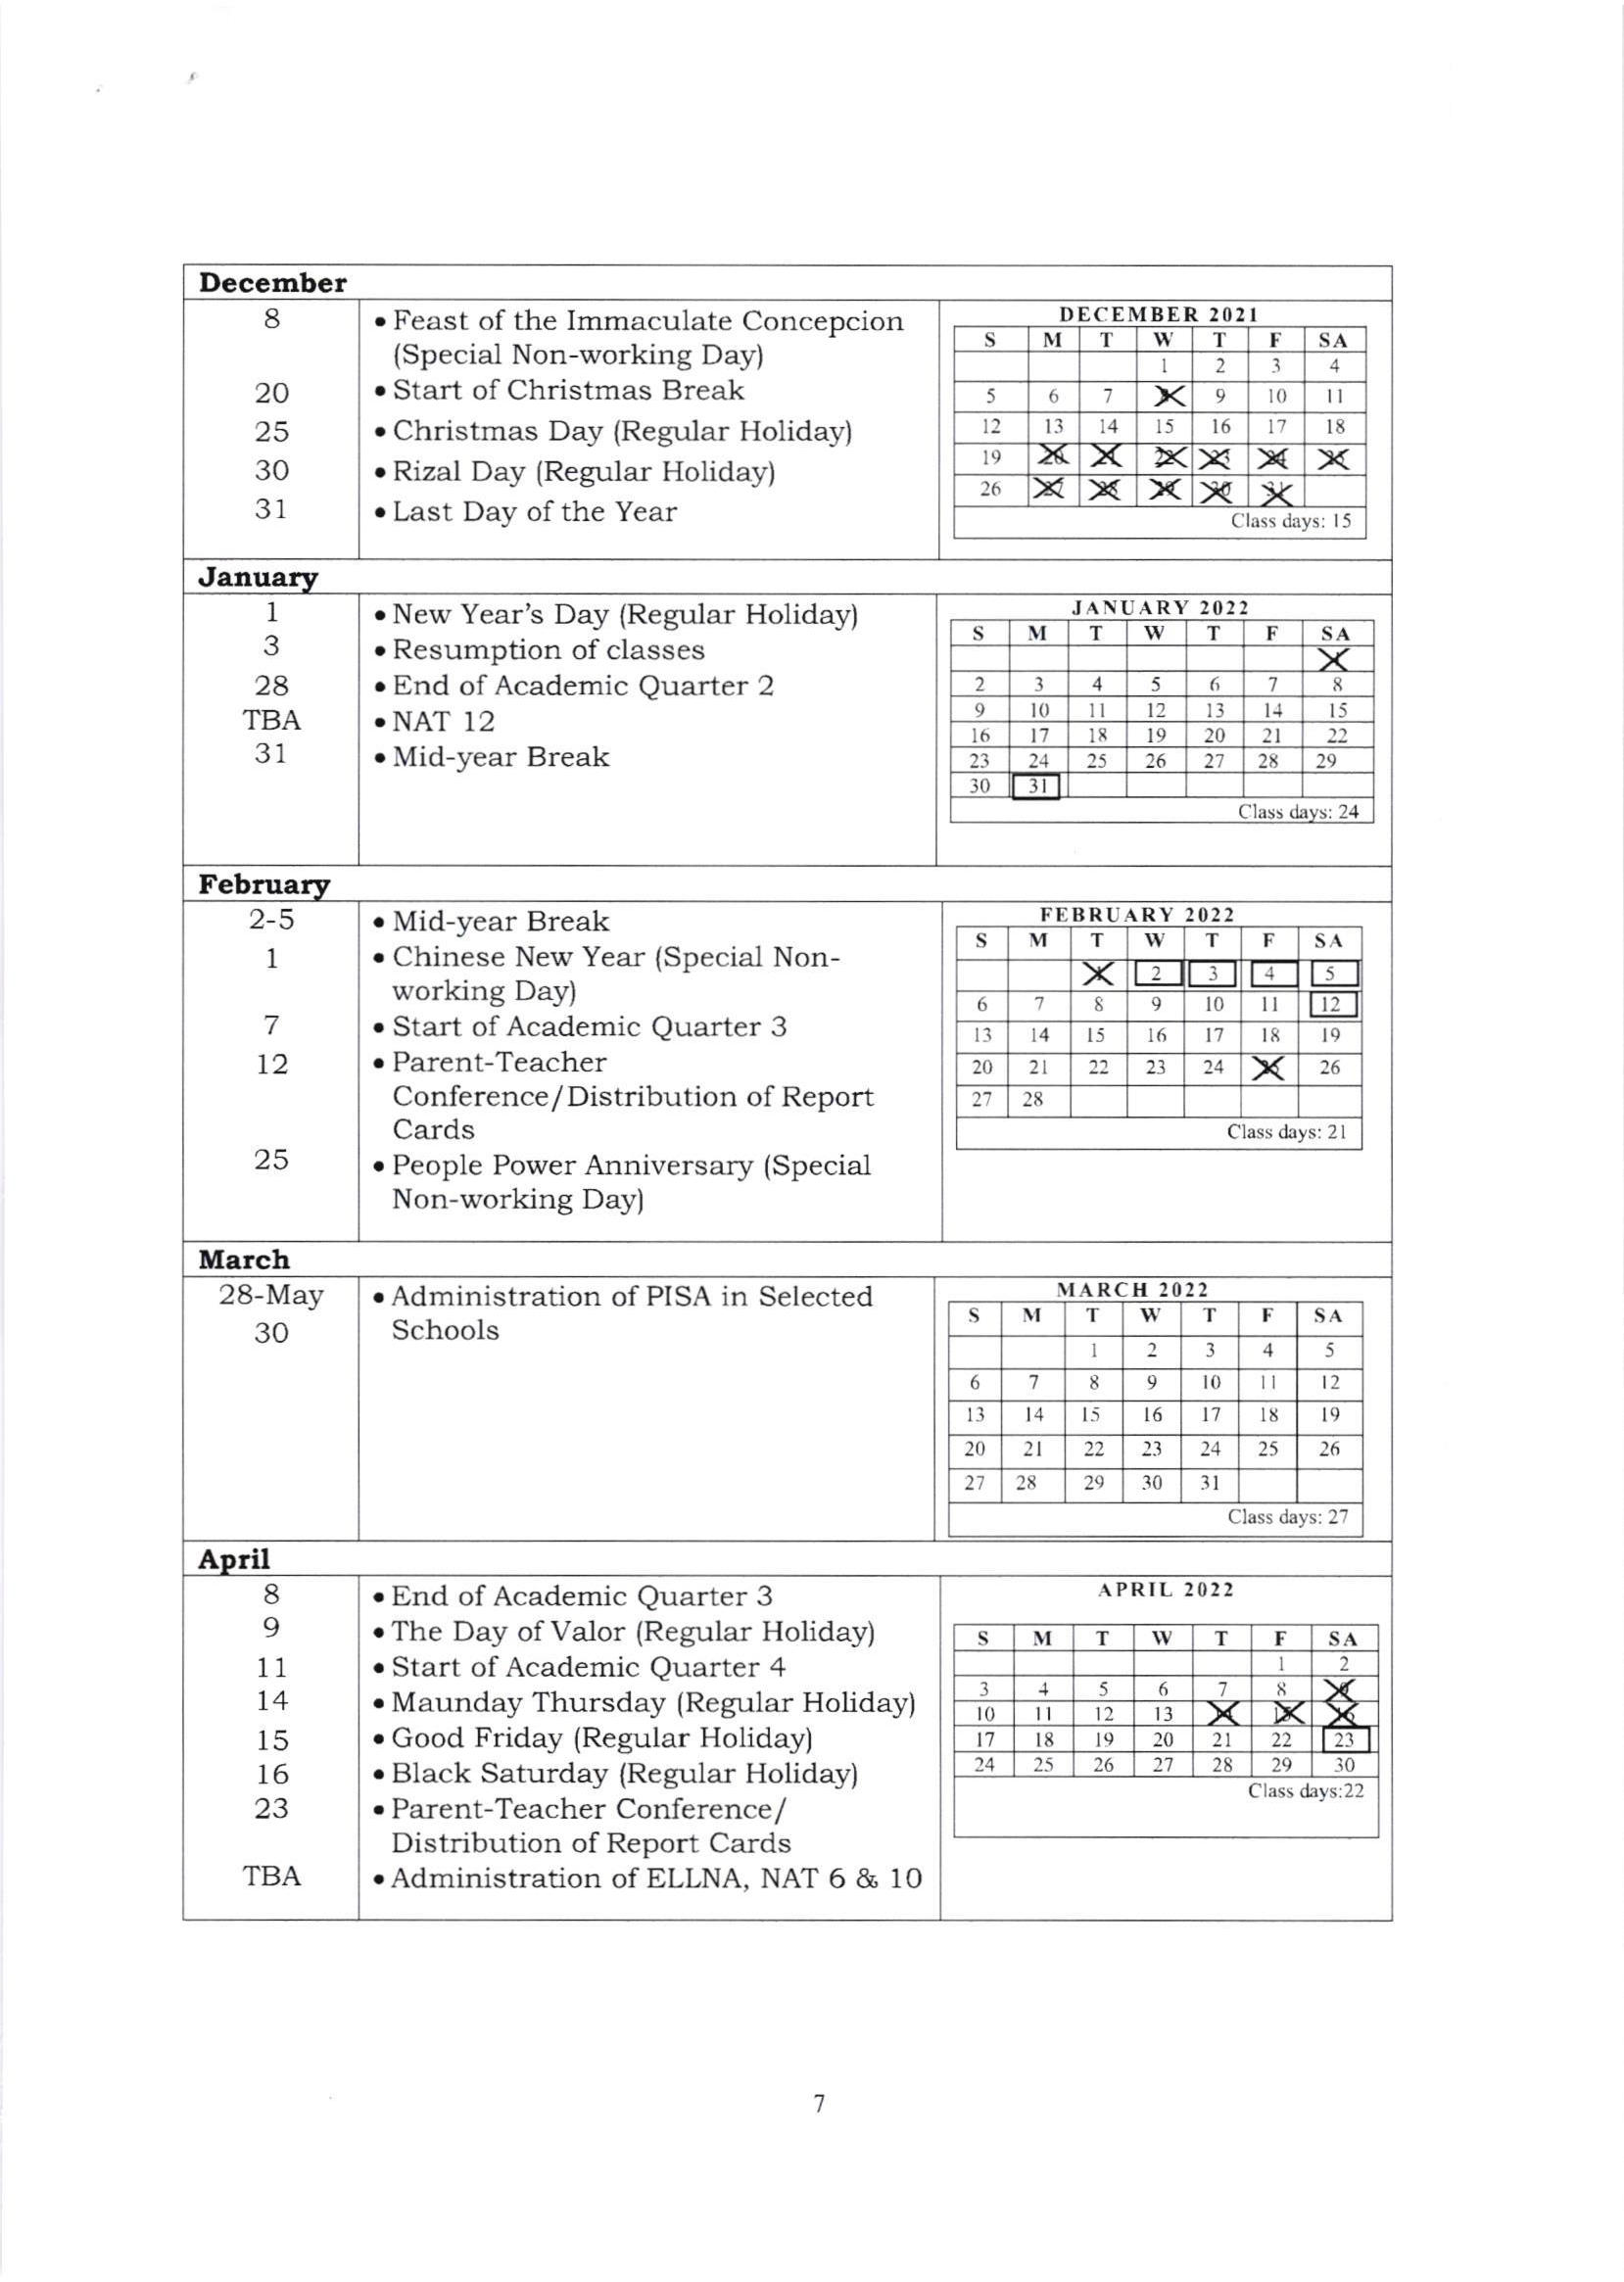 Deped Released Official School Calendar And Activities For Sy 2021 2022